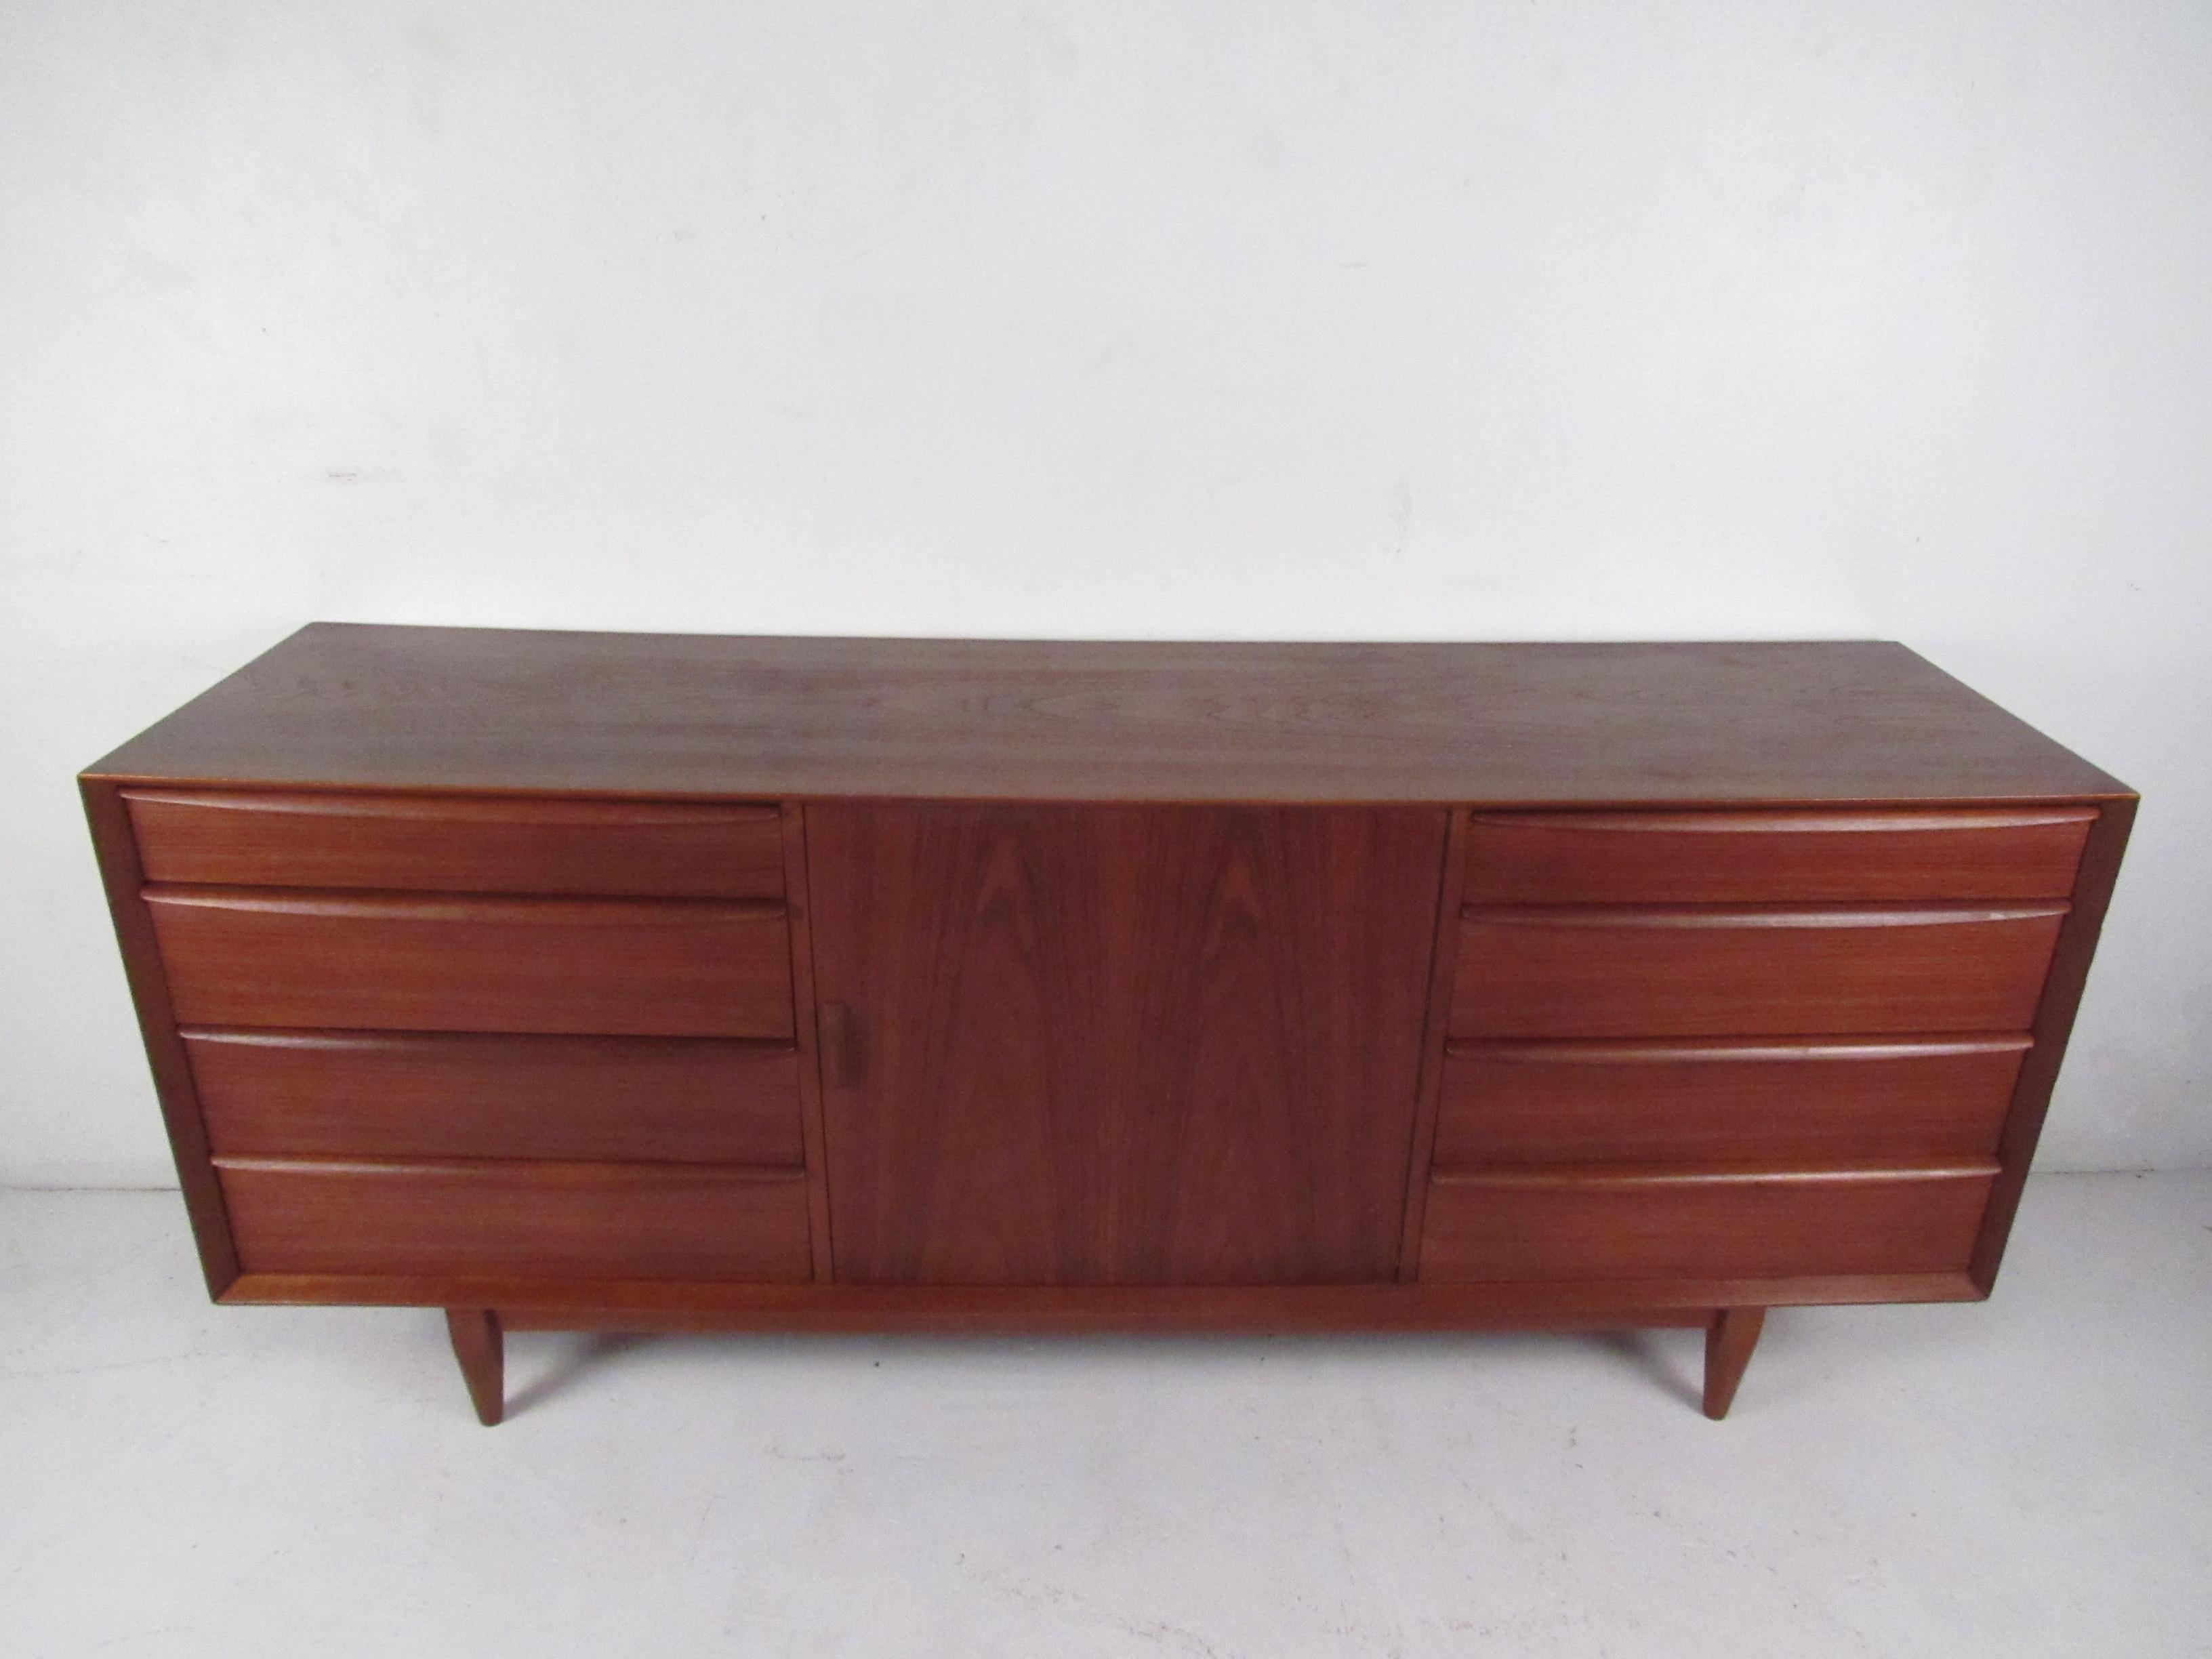 Quality teak Danish modern dresser by Arne Wahl Iverson for Falster. Beautifully designed with multiple storage options, curved drawer pulls, dovetail construction, and tapered legs

Please confirm item location (NY or NJ) with dealer.